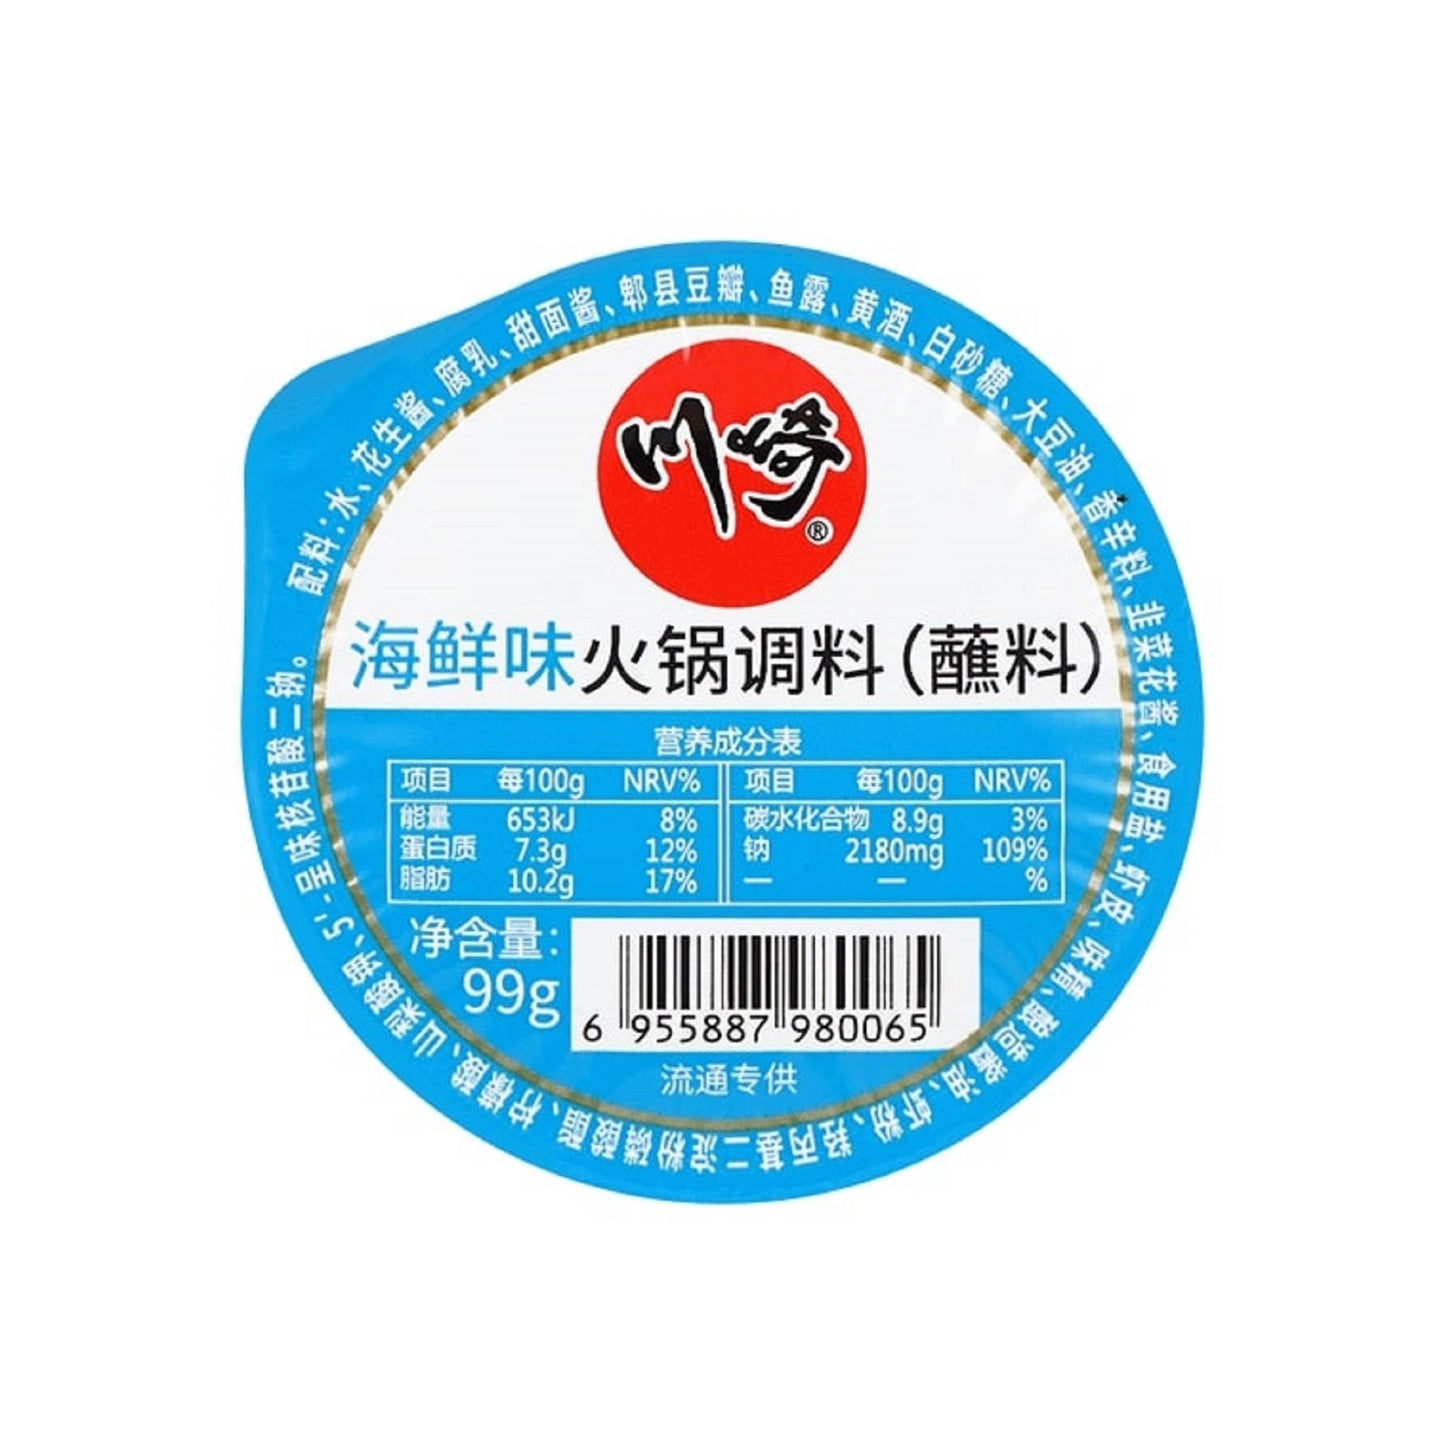 CHUANQI TABLE SAUCE FOR HOT POT (Seafood Flavor) (99g)